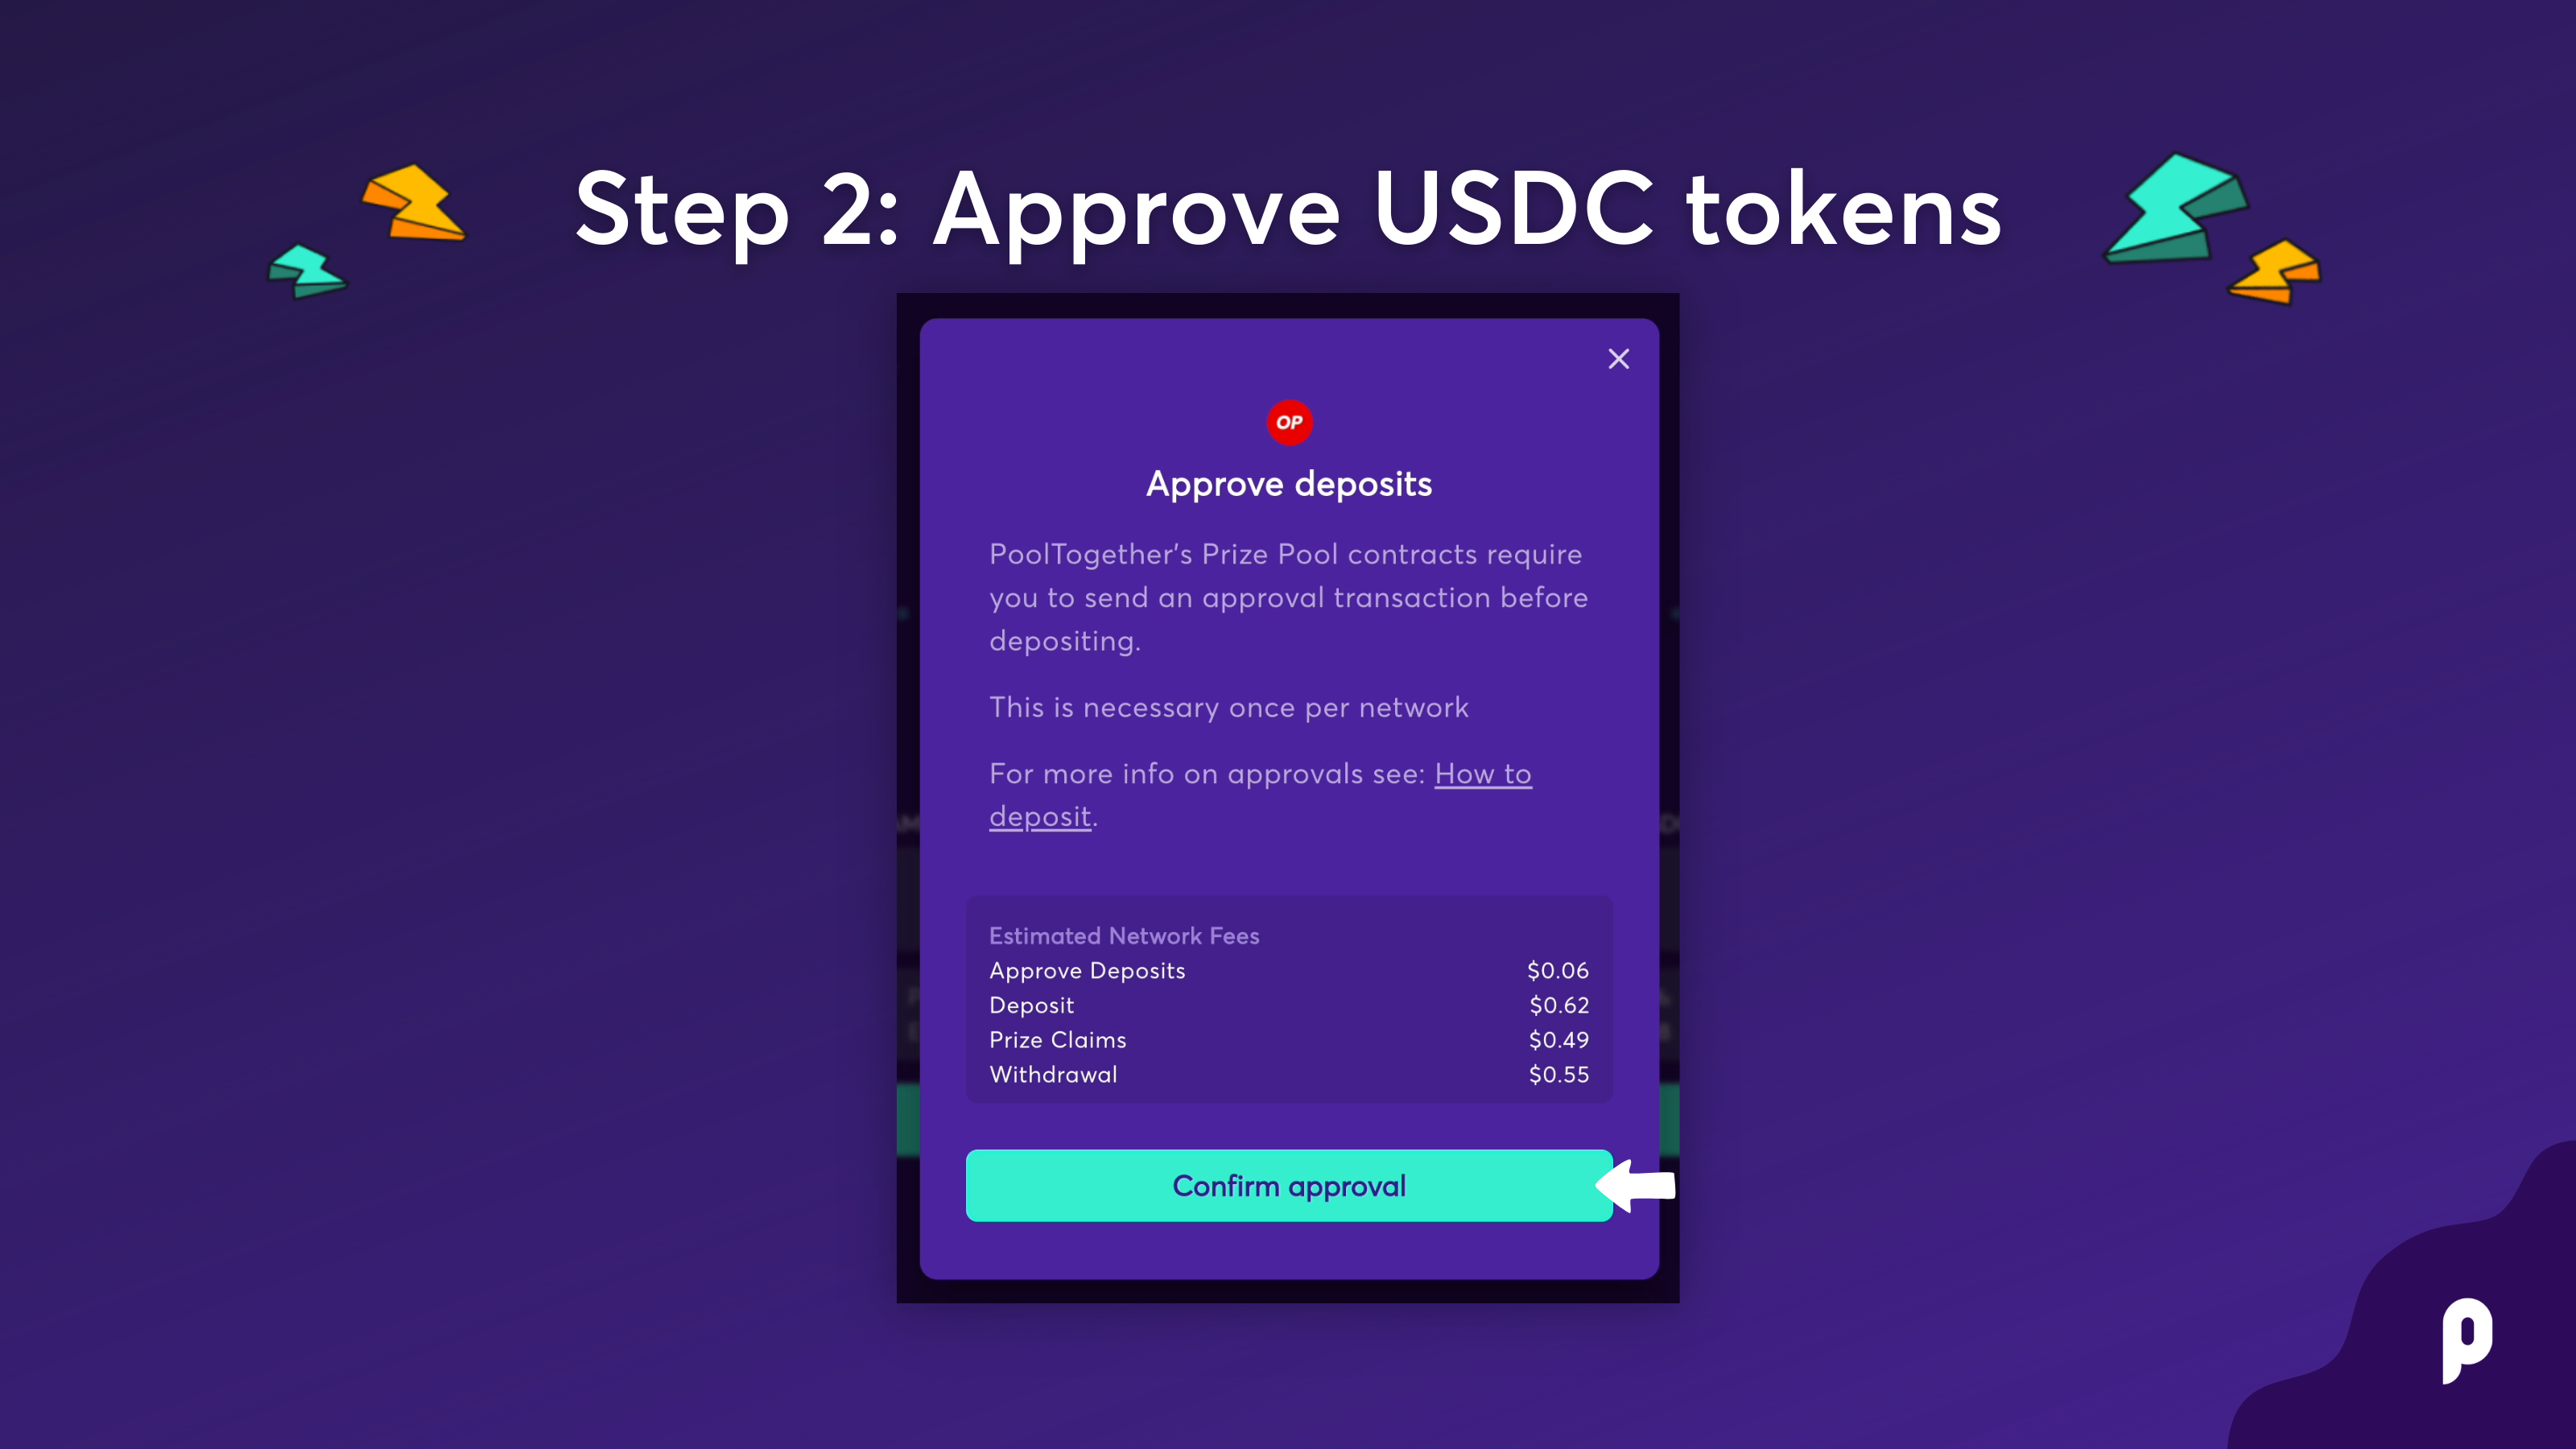 Step 2: Approve USDC tokens